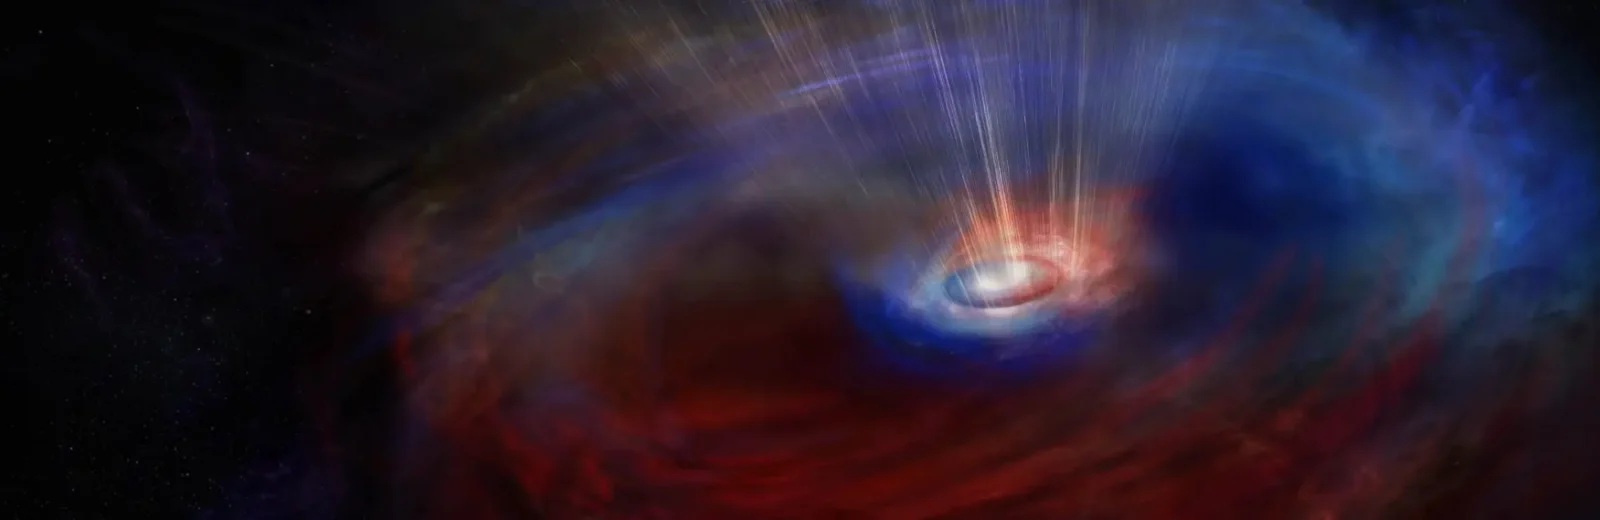 ALMA sees two-way traffic around a black hole